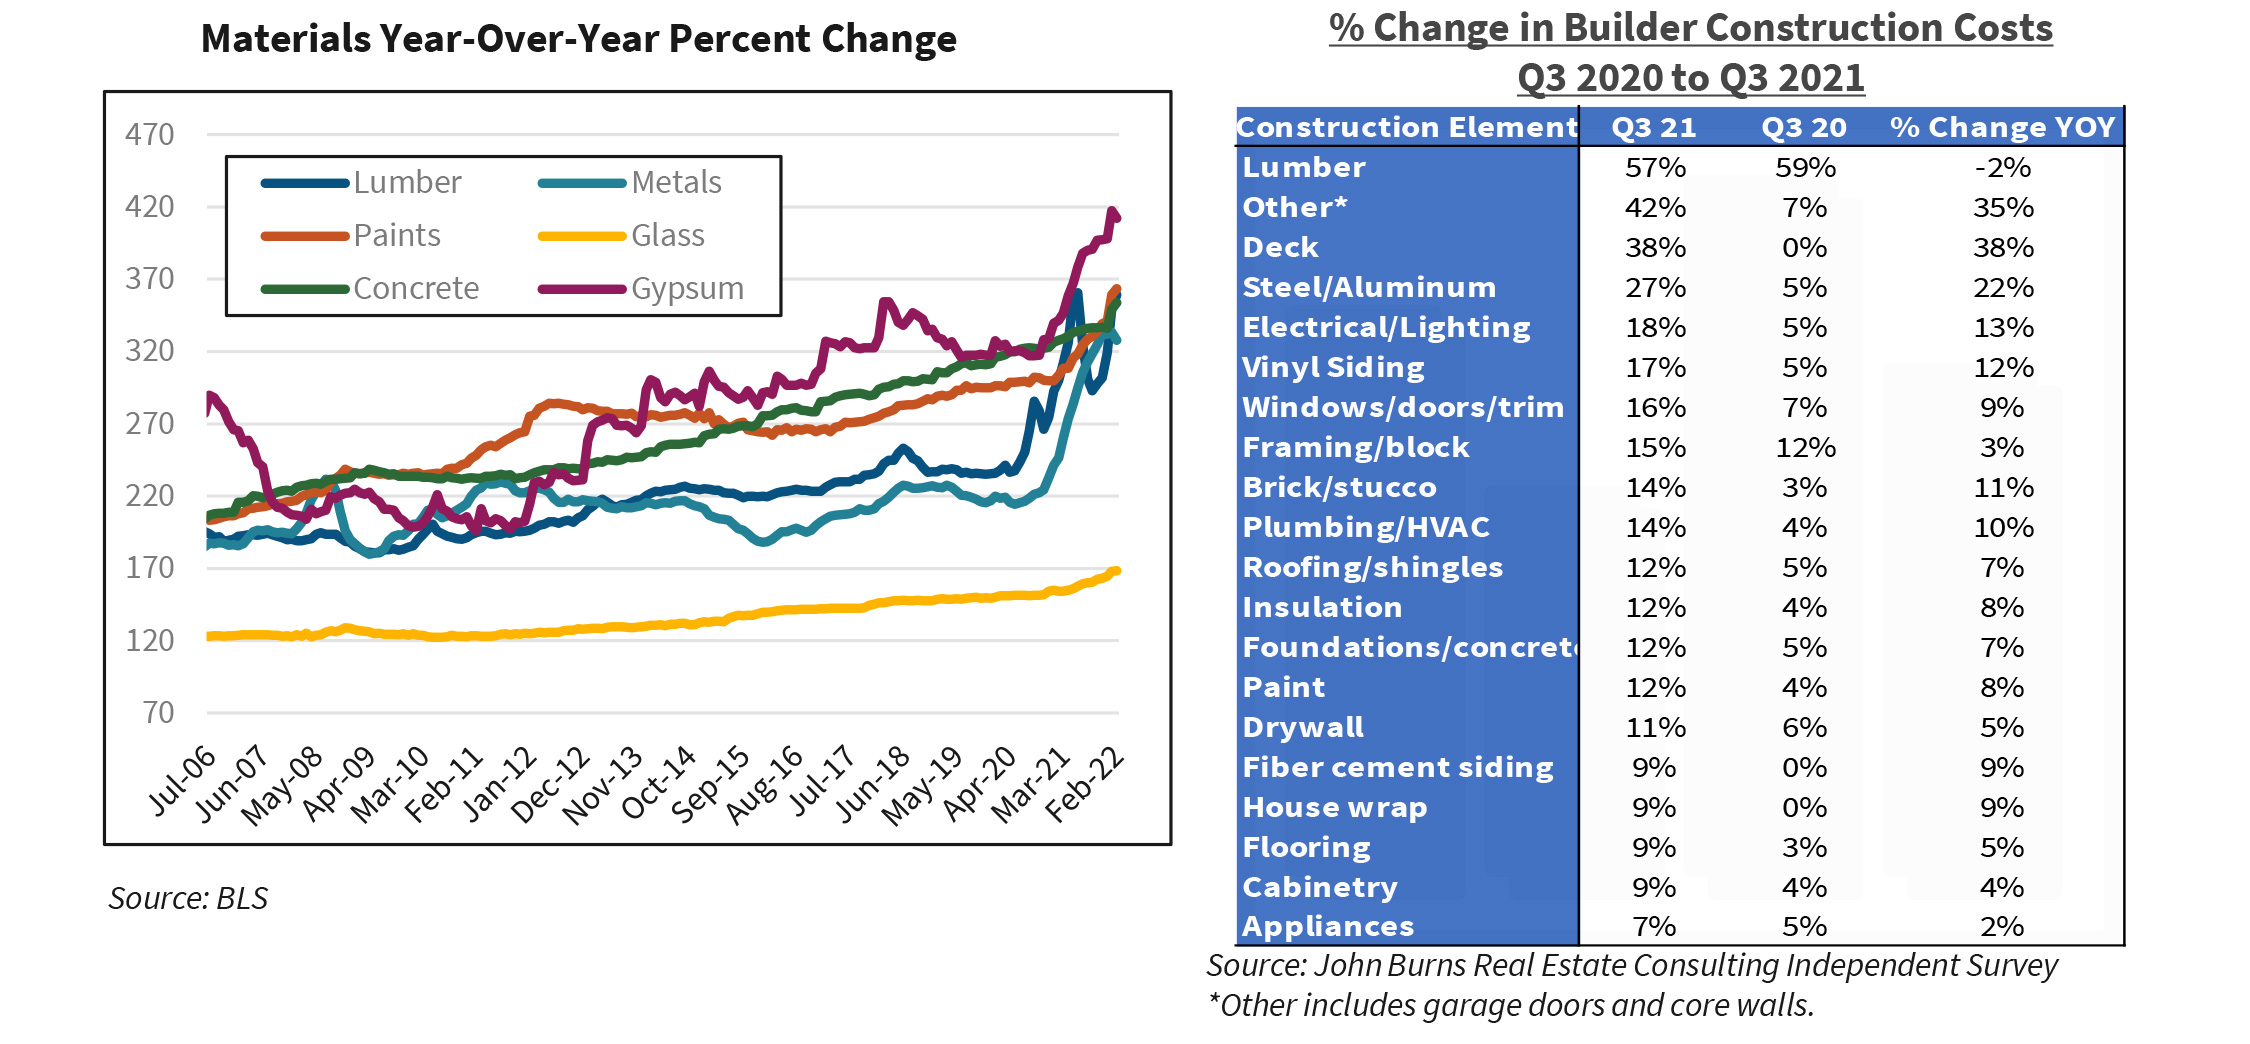 Materials Year-Over-Year Percent Change | % Change in Builder Construction Costs  Q3 2020 to Q3 2021